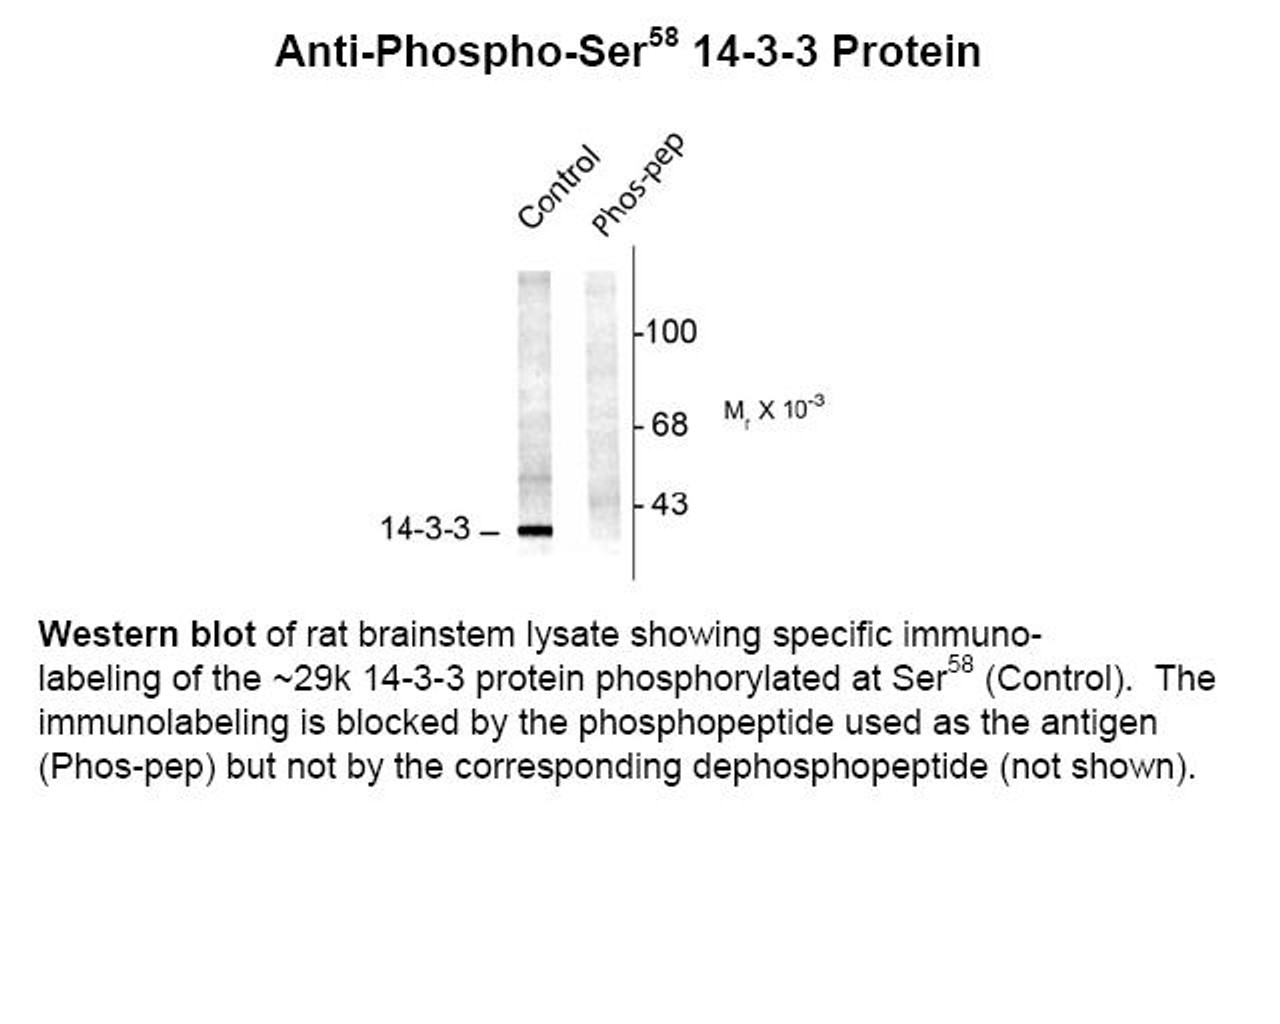 Western blot of rat brainstem lysate showing specific immunolabeling of the ~29k 14-3-3 protein phosphorylated at Ser58 (Control) . The immunolabeling is blocked by the phosphopeptide used as the antigen (Phos-pep) but not by the corresponding dephosphopeptide (not shown) .